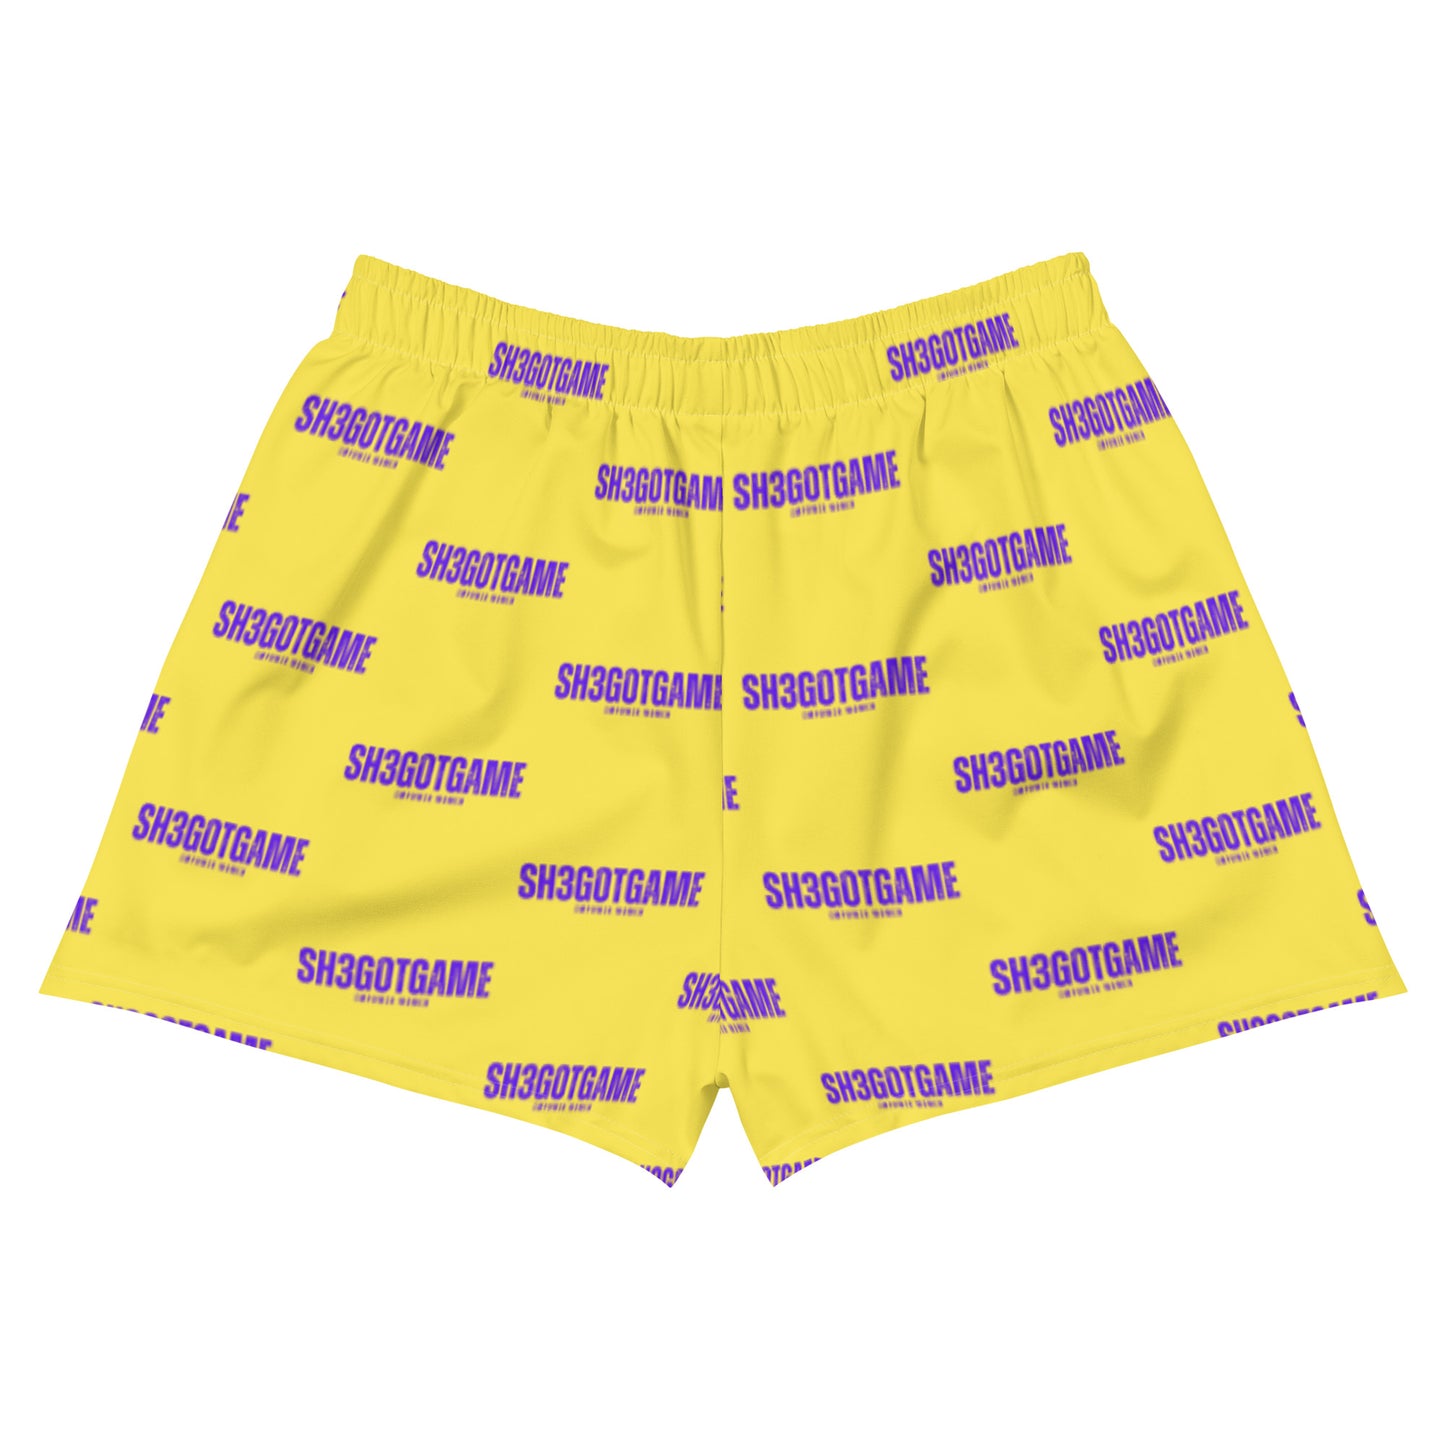 Sh3gotgame Purple and Gold Shorts